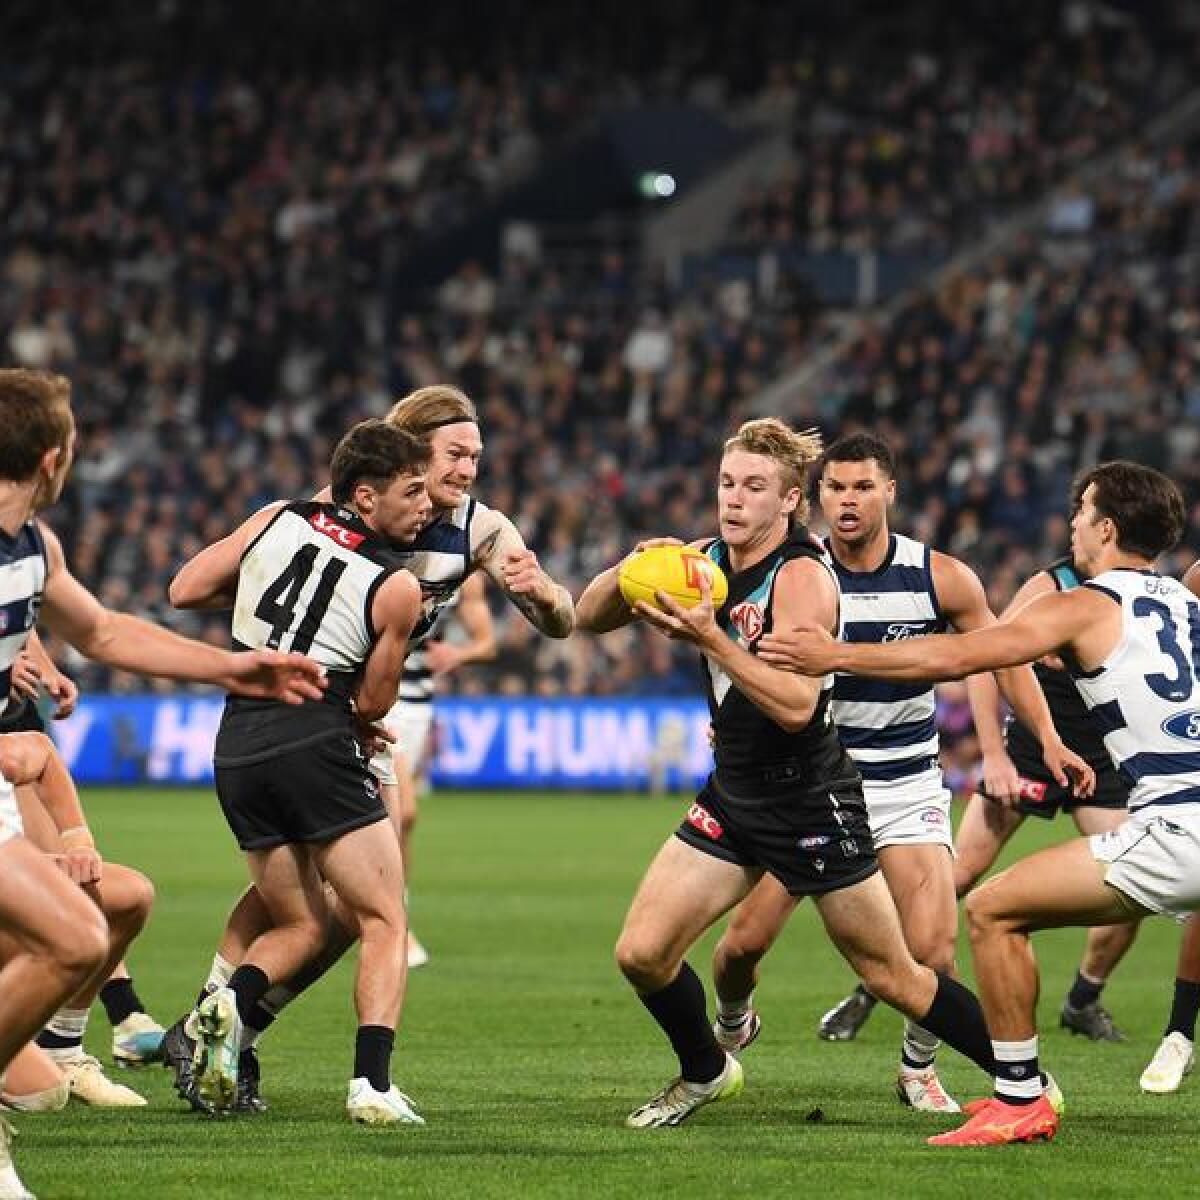 Action from Port Adelaide against Geelong. 